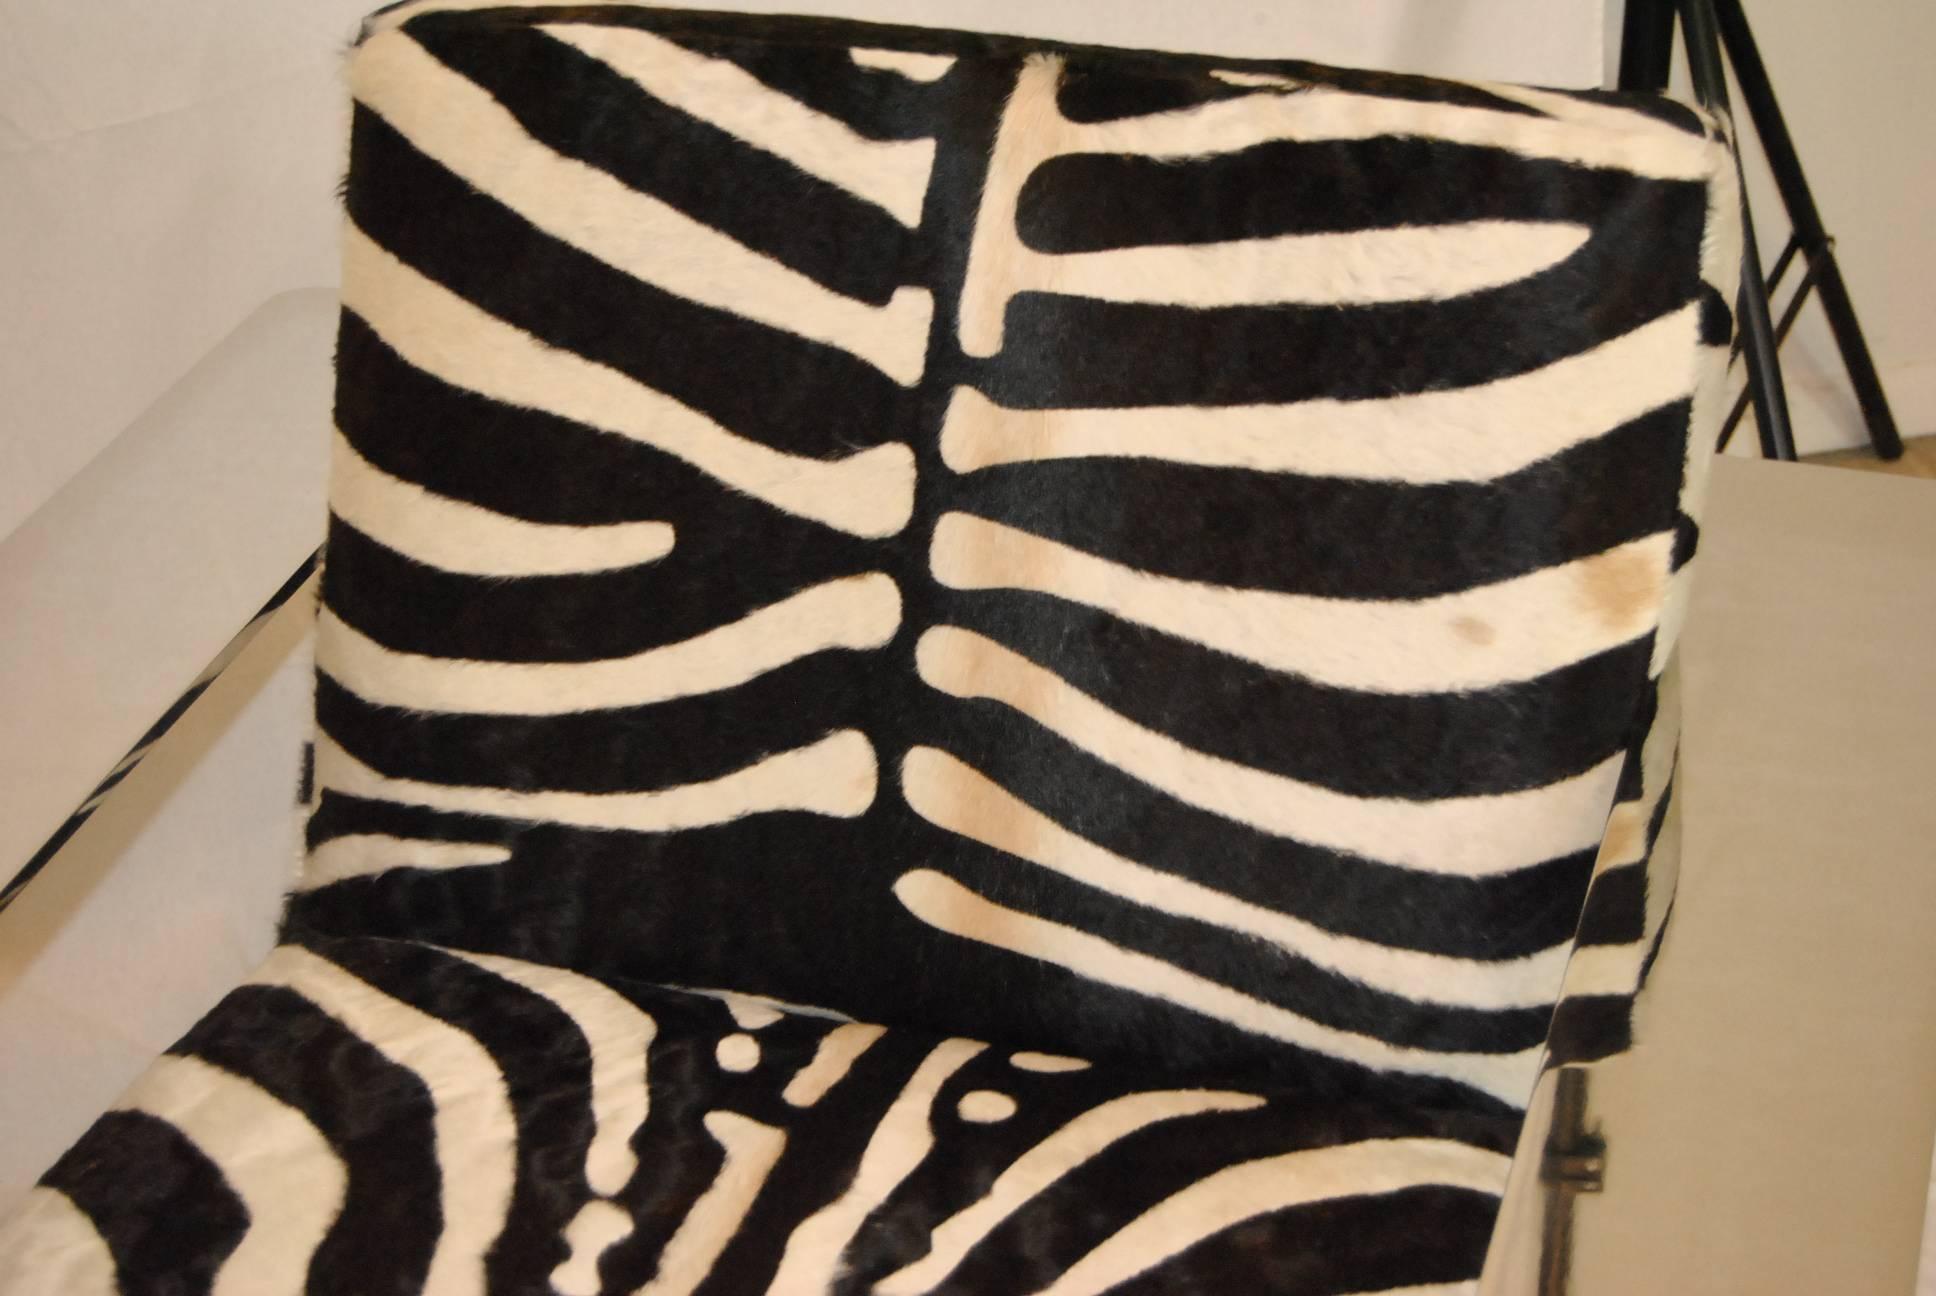 Contemporary Pair of Connor Chairs with Chrome Frame and Zebra Print Cowhide Upholstery